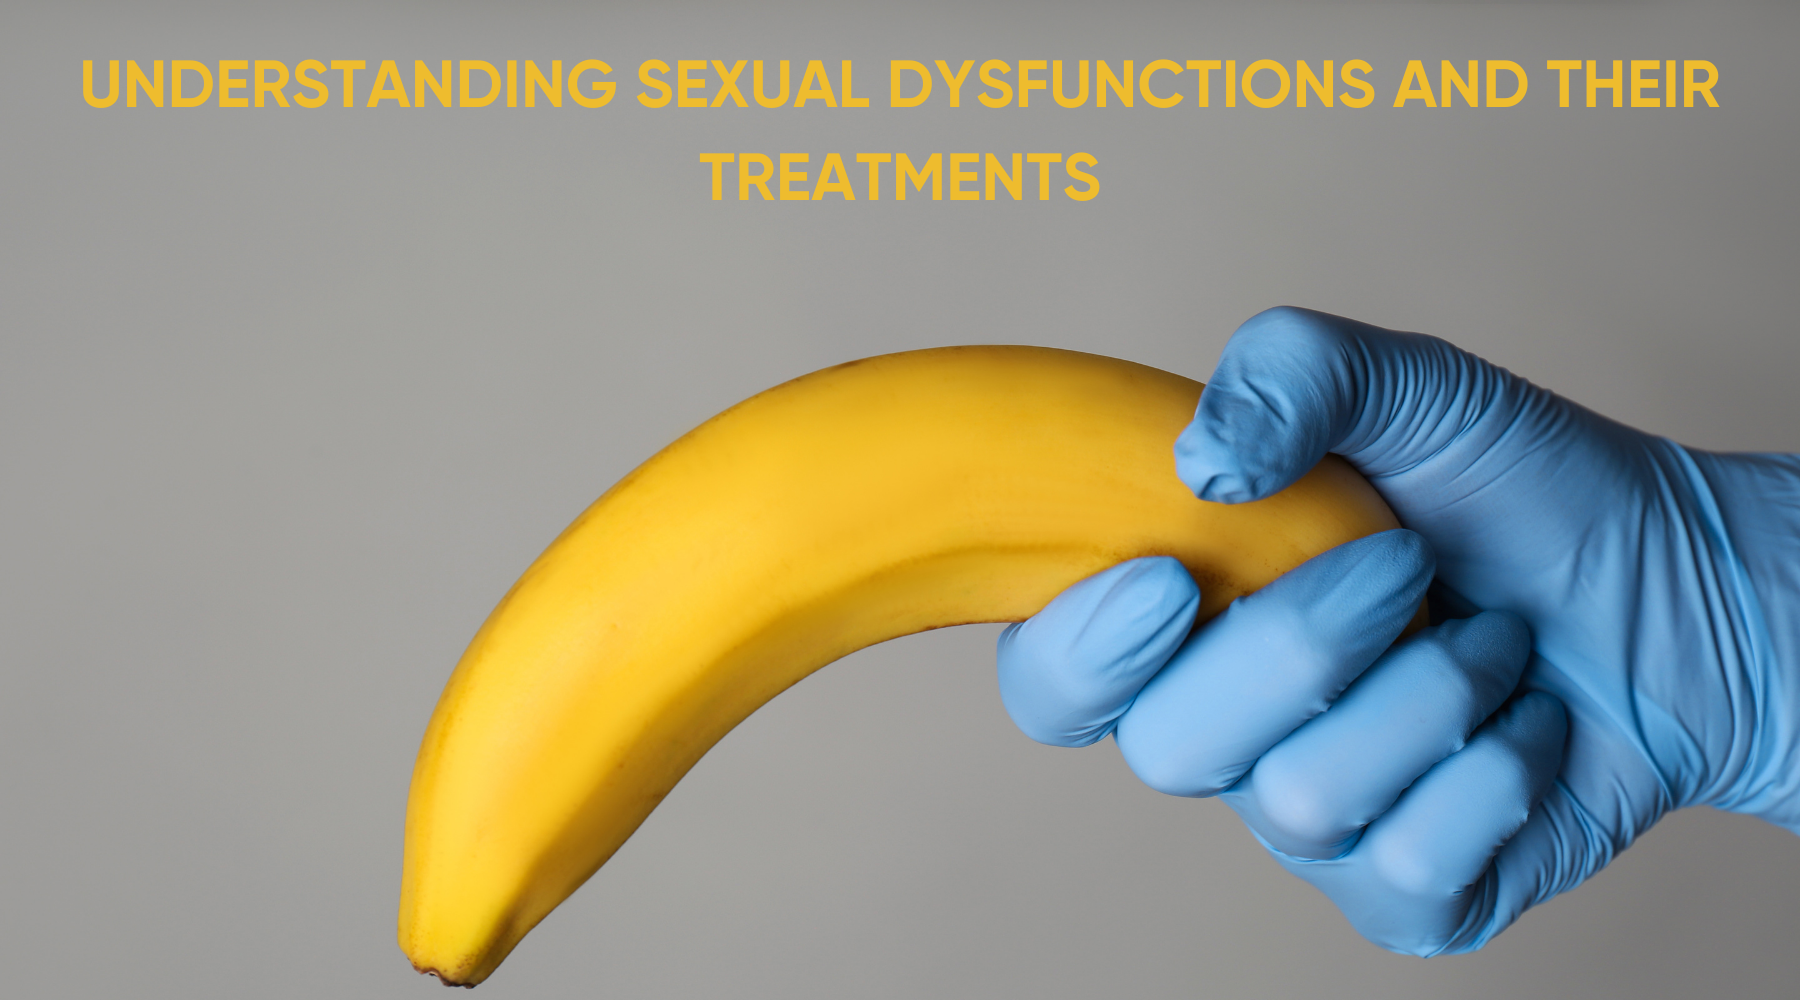 UNDERSTANDING SEXUAL DYSFUNCTIONS AND THEIR TREATMENTS